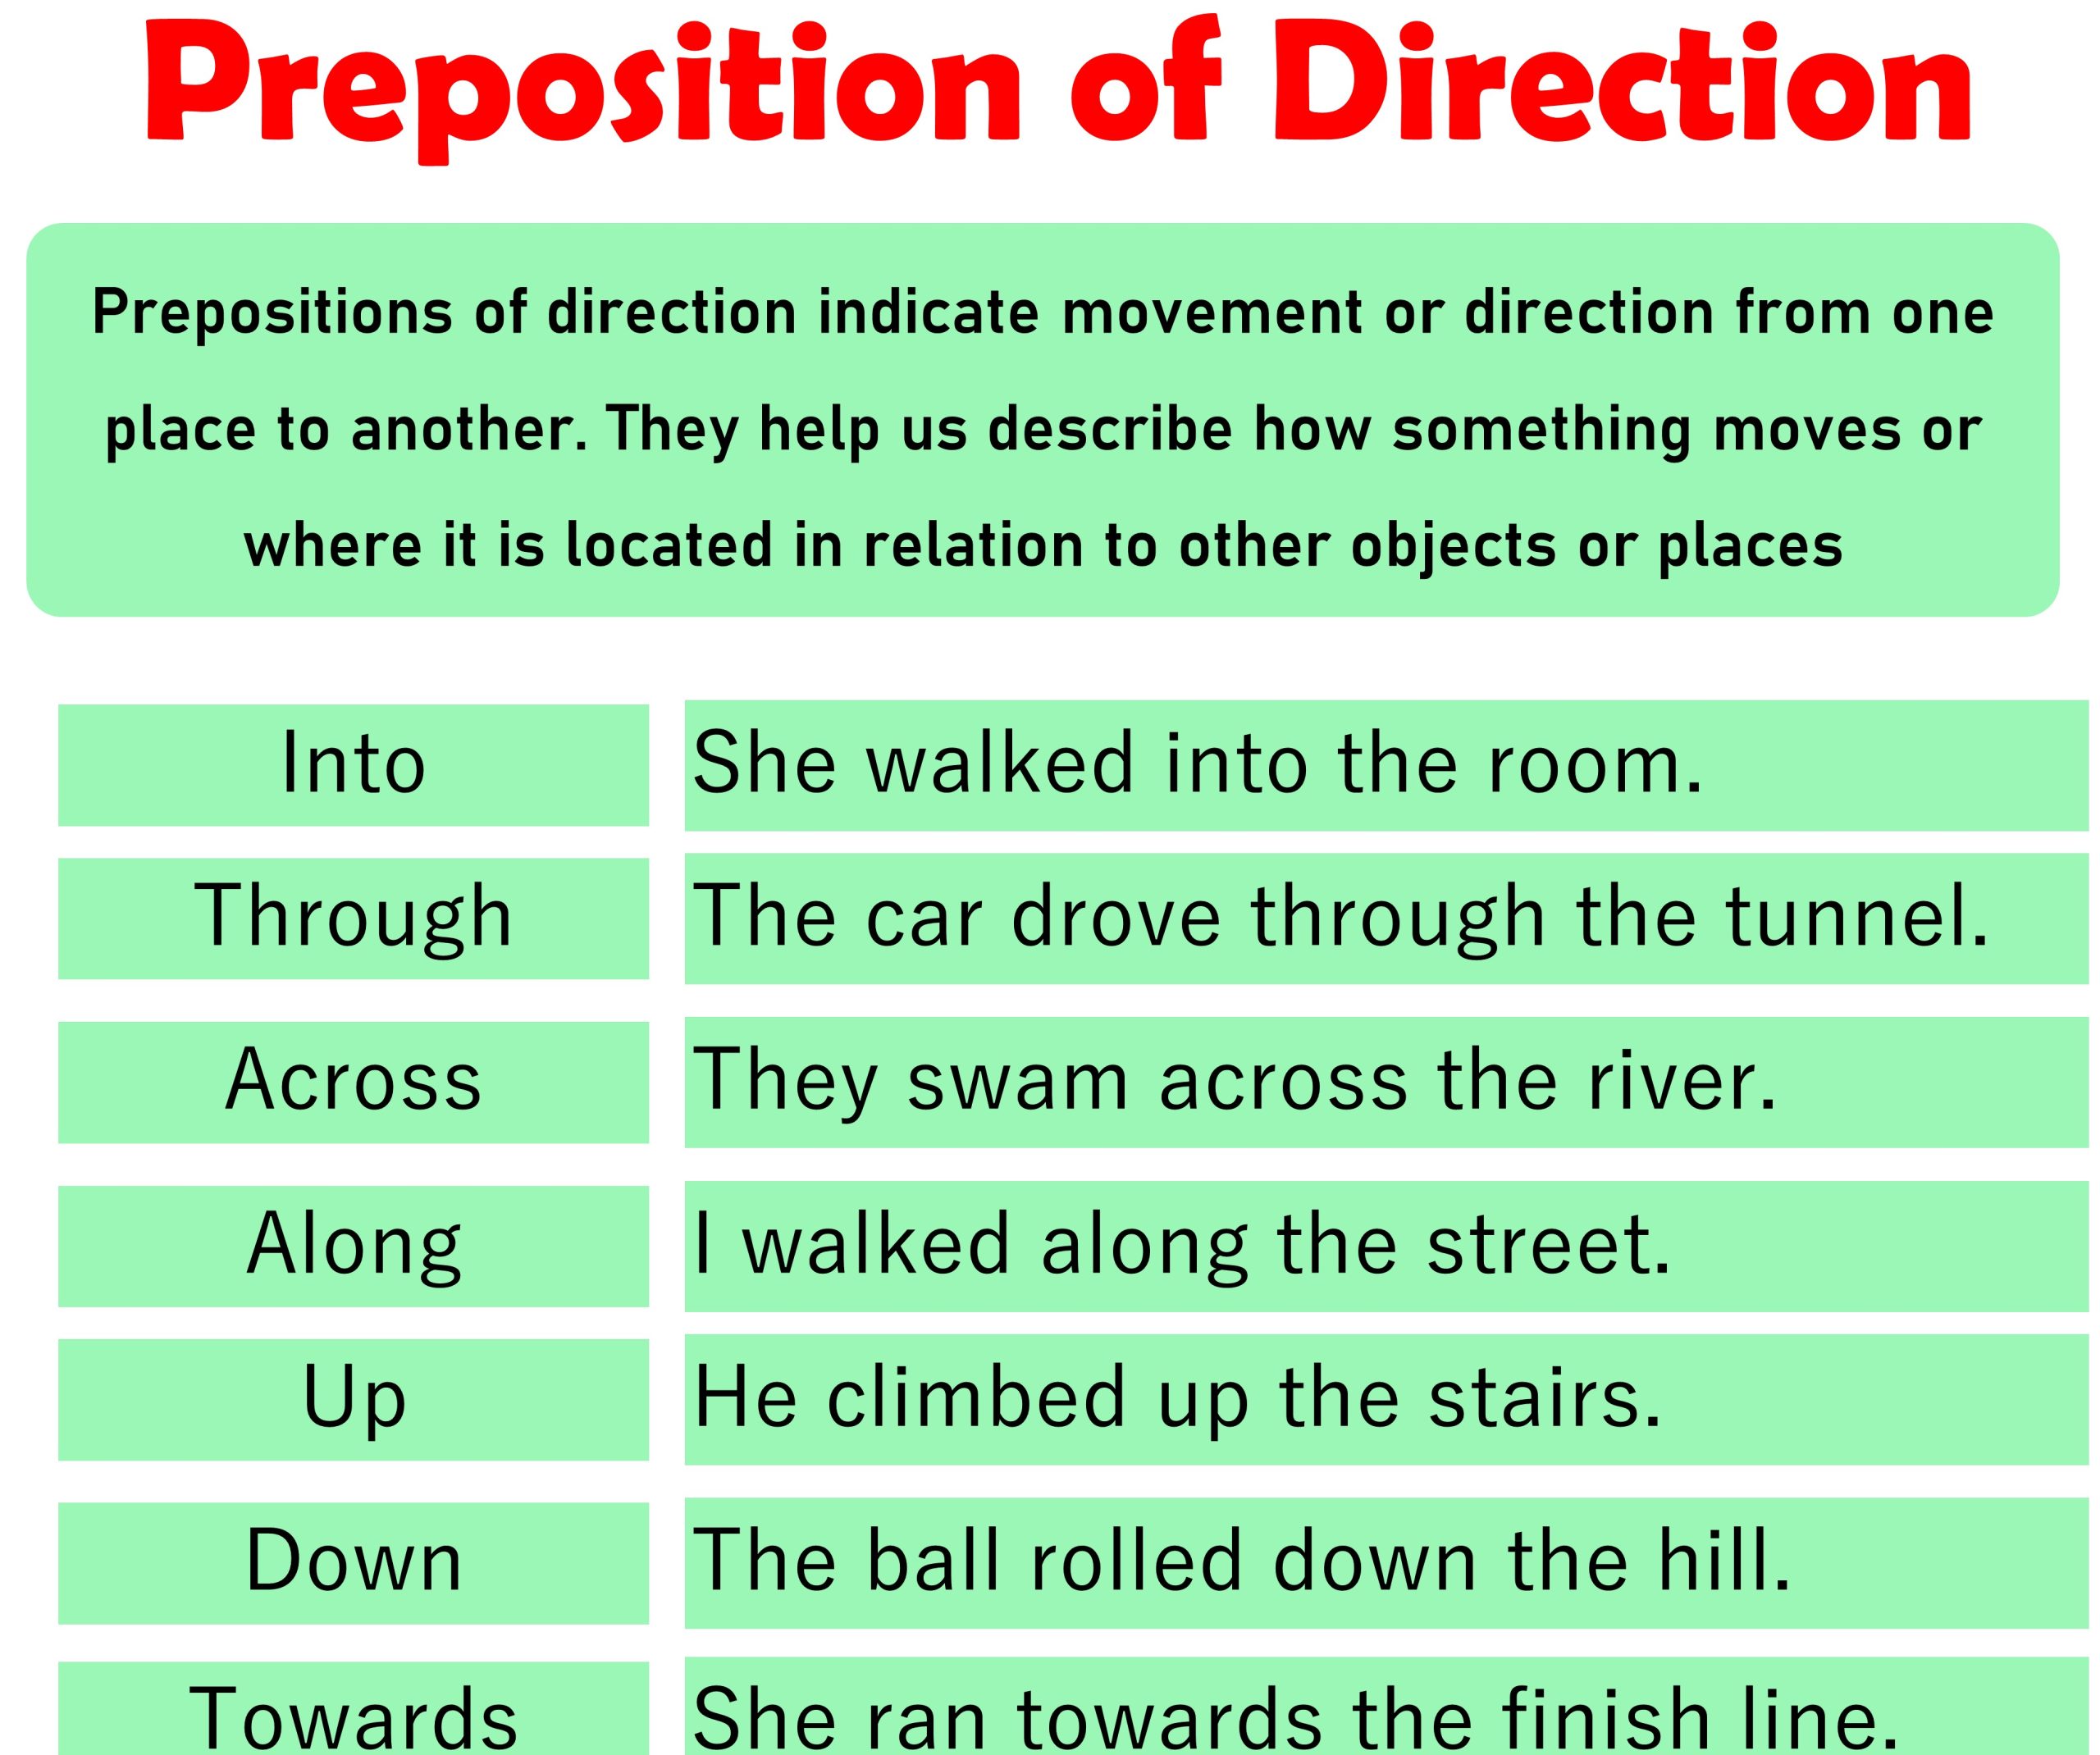 Prepositions of Direction in English with Examples